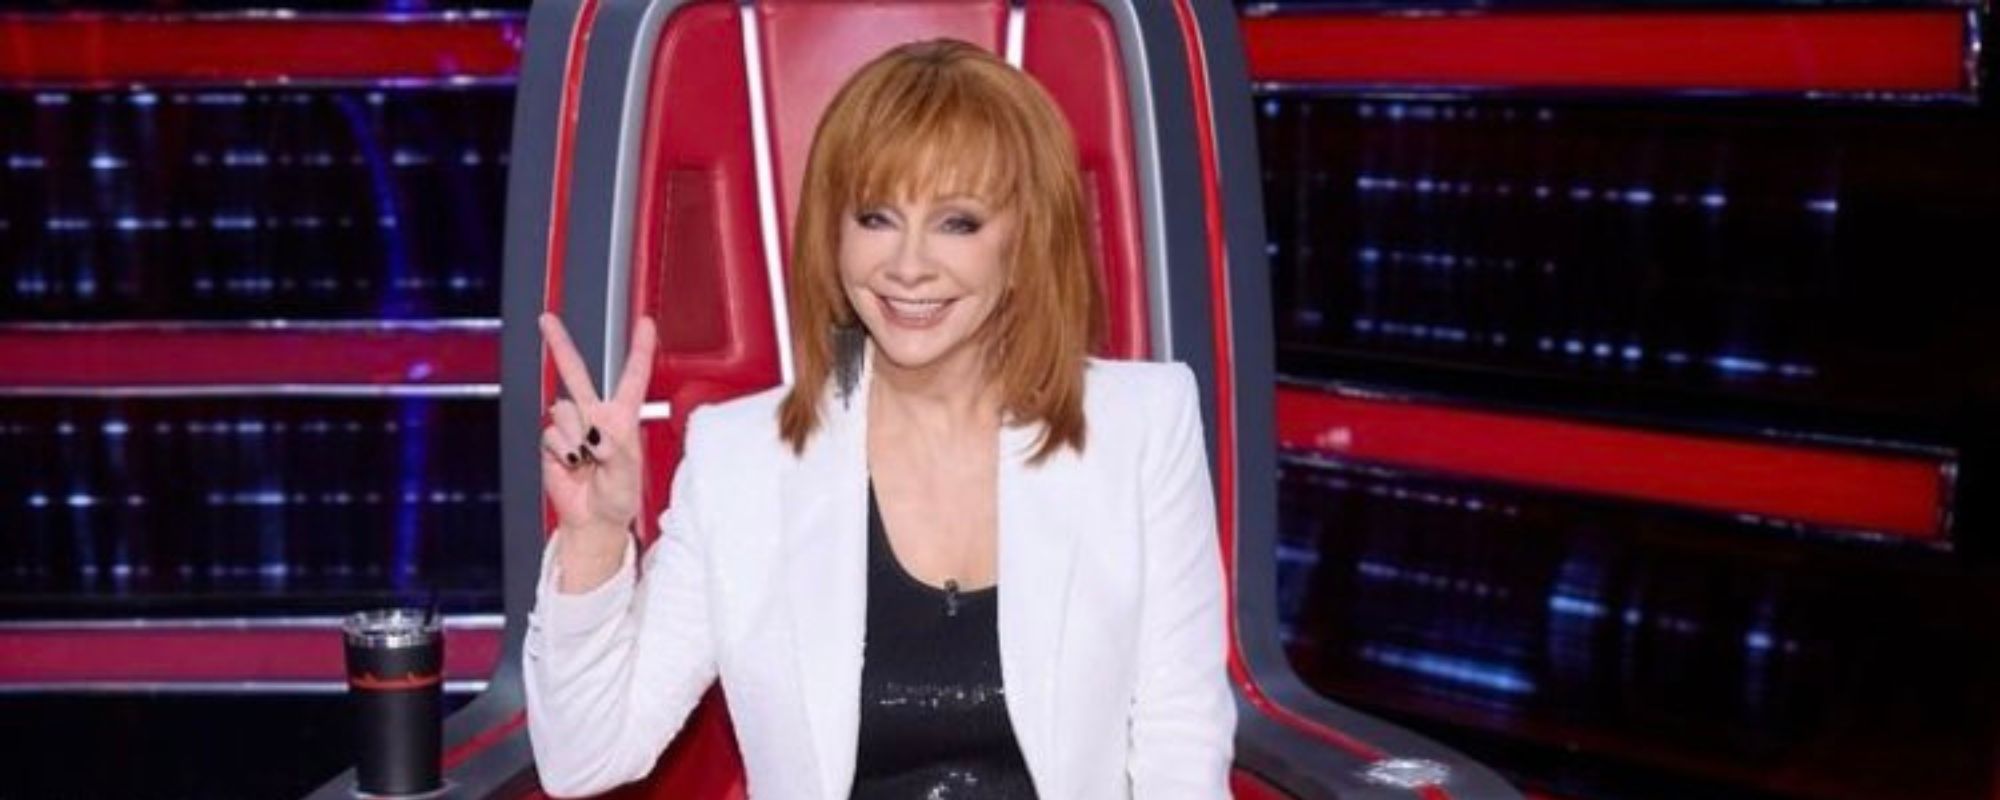 ‘The Voice’ Star Reba McEntire Proves She’s the Queen of Country With Dazzling Debut Performance of “I Can’t”